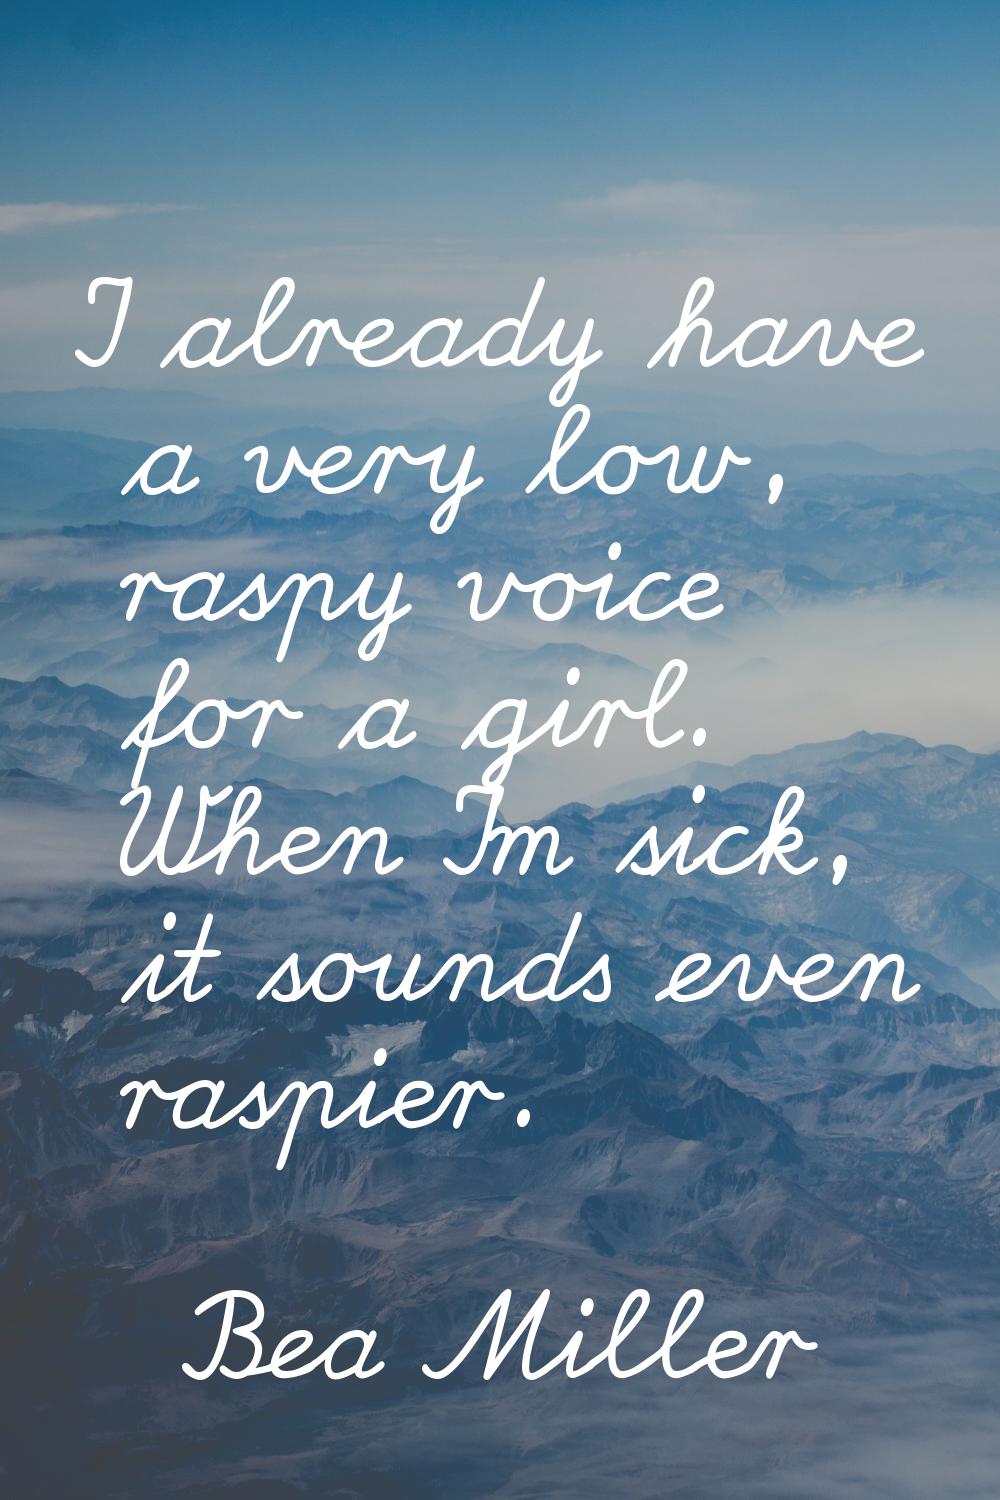 I already have a very low, raspy voice for a girl. When I'm sick, it sounds even raspier.